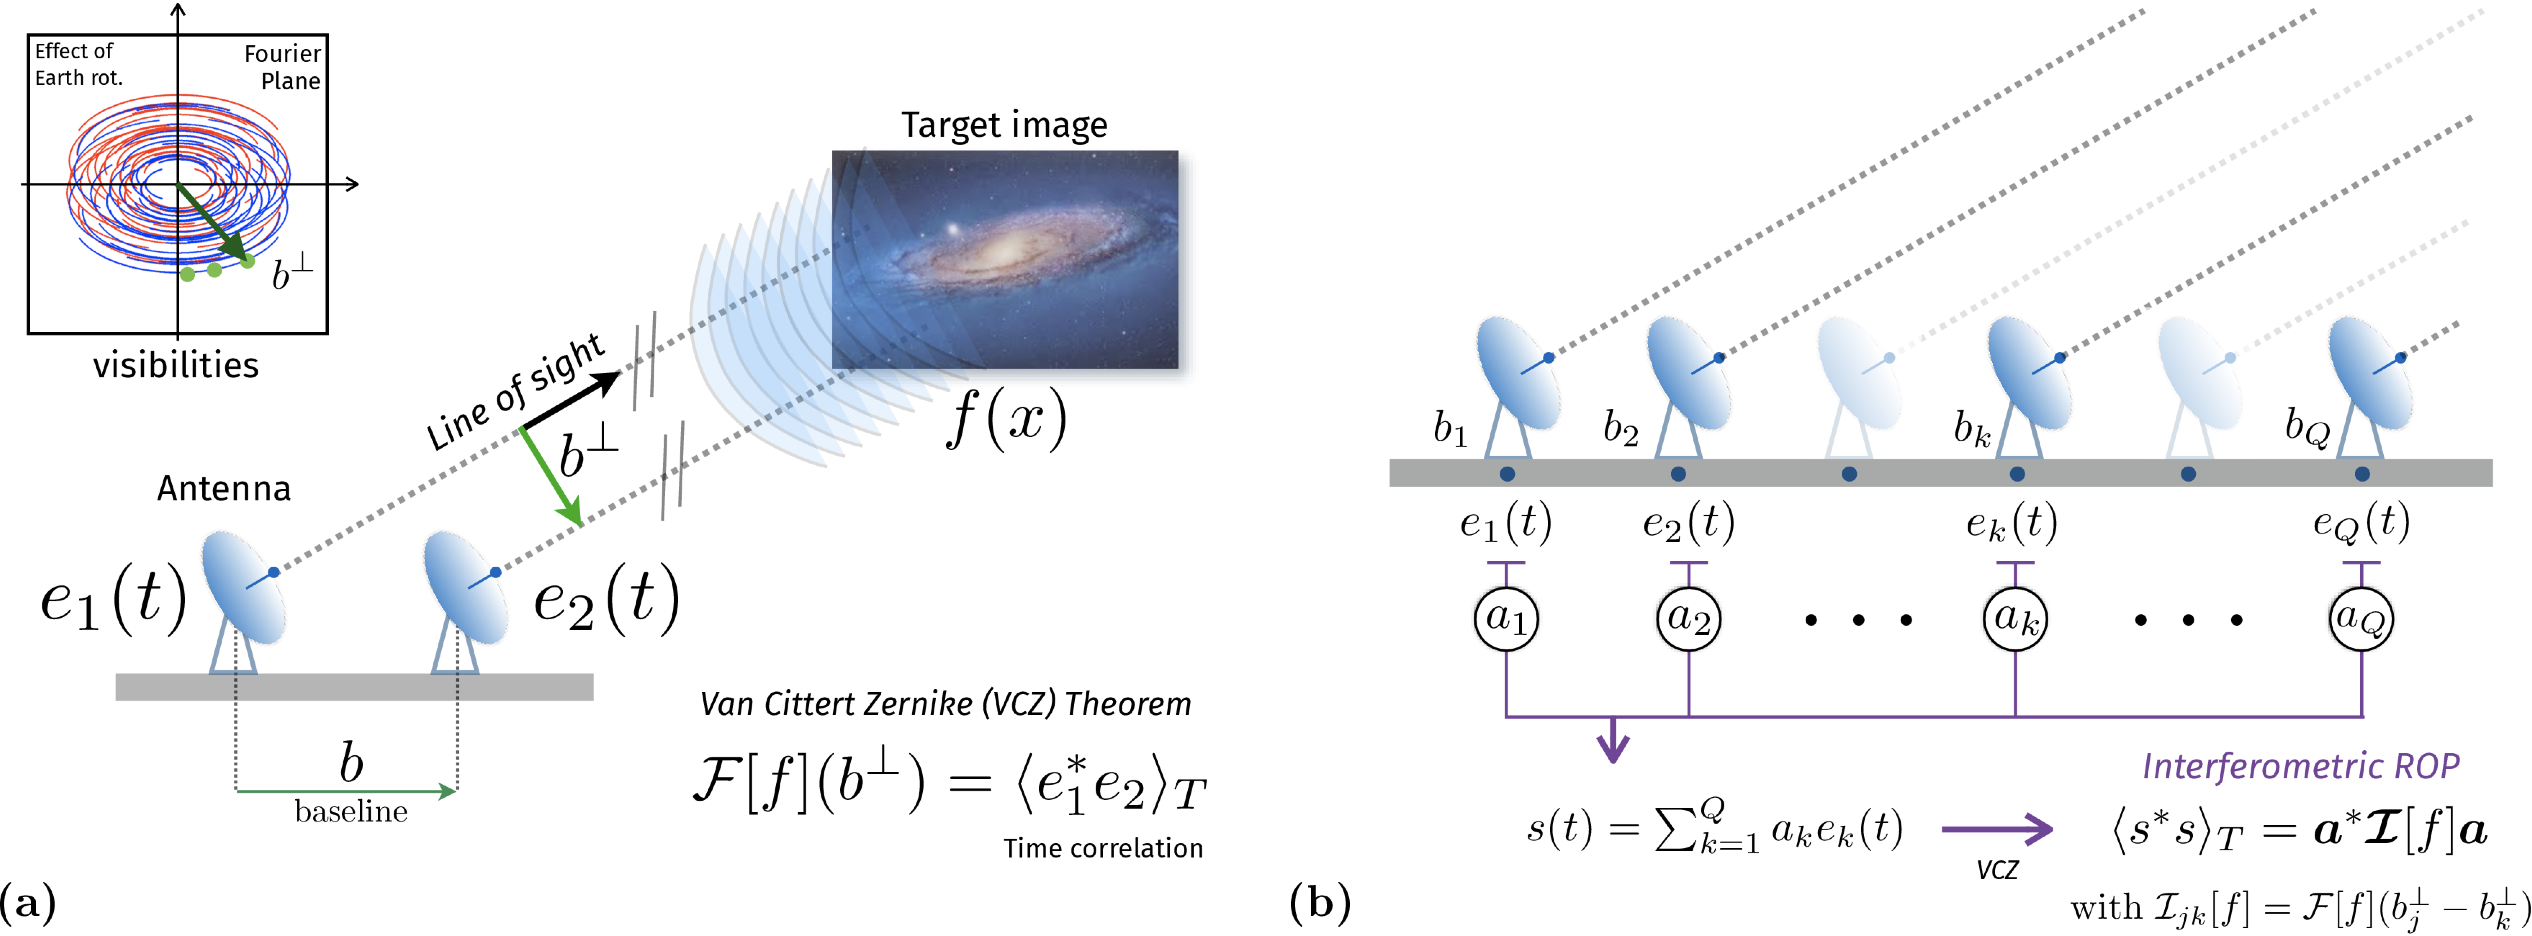 Figure 3: (a) In radio-interferometric imaging (RII), an array of radio telescopes observes an object of interest \\(f\\) in a part of the sky. The van Cittert-Zernike theorem (VCZT) shows that the time correlation of two antenna signals amounts to the evaluation of the spatial Fourier transform of \\(f\\) on a frequency vector (or visibility) \\(b^{\perp}\\), which results from the projection of the baseline vector \\(b\\) of the antenna pair onto the object plane. (b) In QuadSense, inspired by the similarities with the sensing model of interferometric lensless imaging, we will study new compression schemes for the antenna signals. In particular, by the VCZT, by linearly combining the signals of a group of \\(Q\\) antennas adjusted by separate gains a \\(Q\\), the time autocorrelation of the resulting signal \\(s(t)\\) is the ROP (with a sketching vector \\(a=(a\_{1}, a\_{2}, \ldots , a\_{Q})\\) of the interferometric matrix \\(\mathcal{I}[f]\\) of \\(f\\).